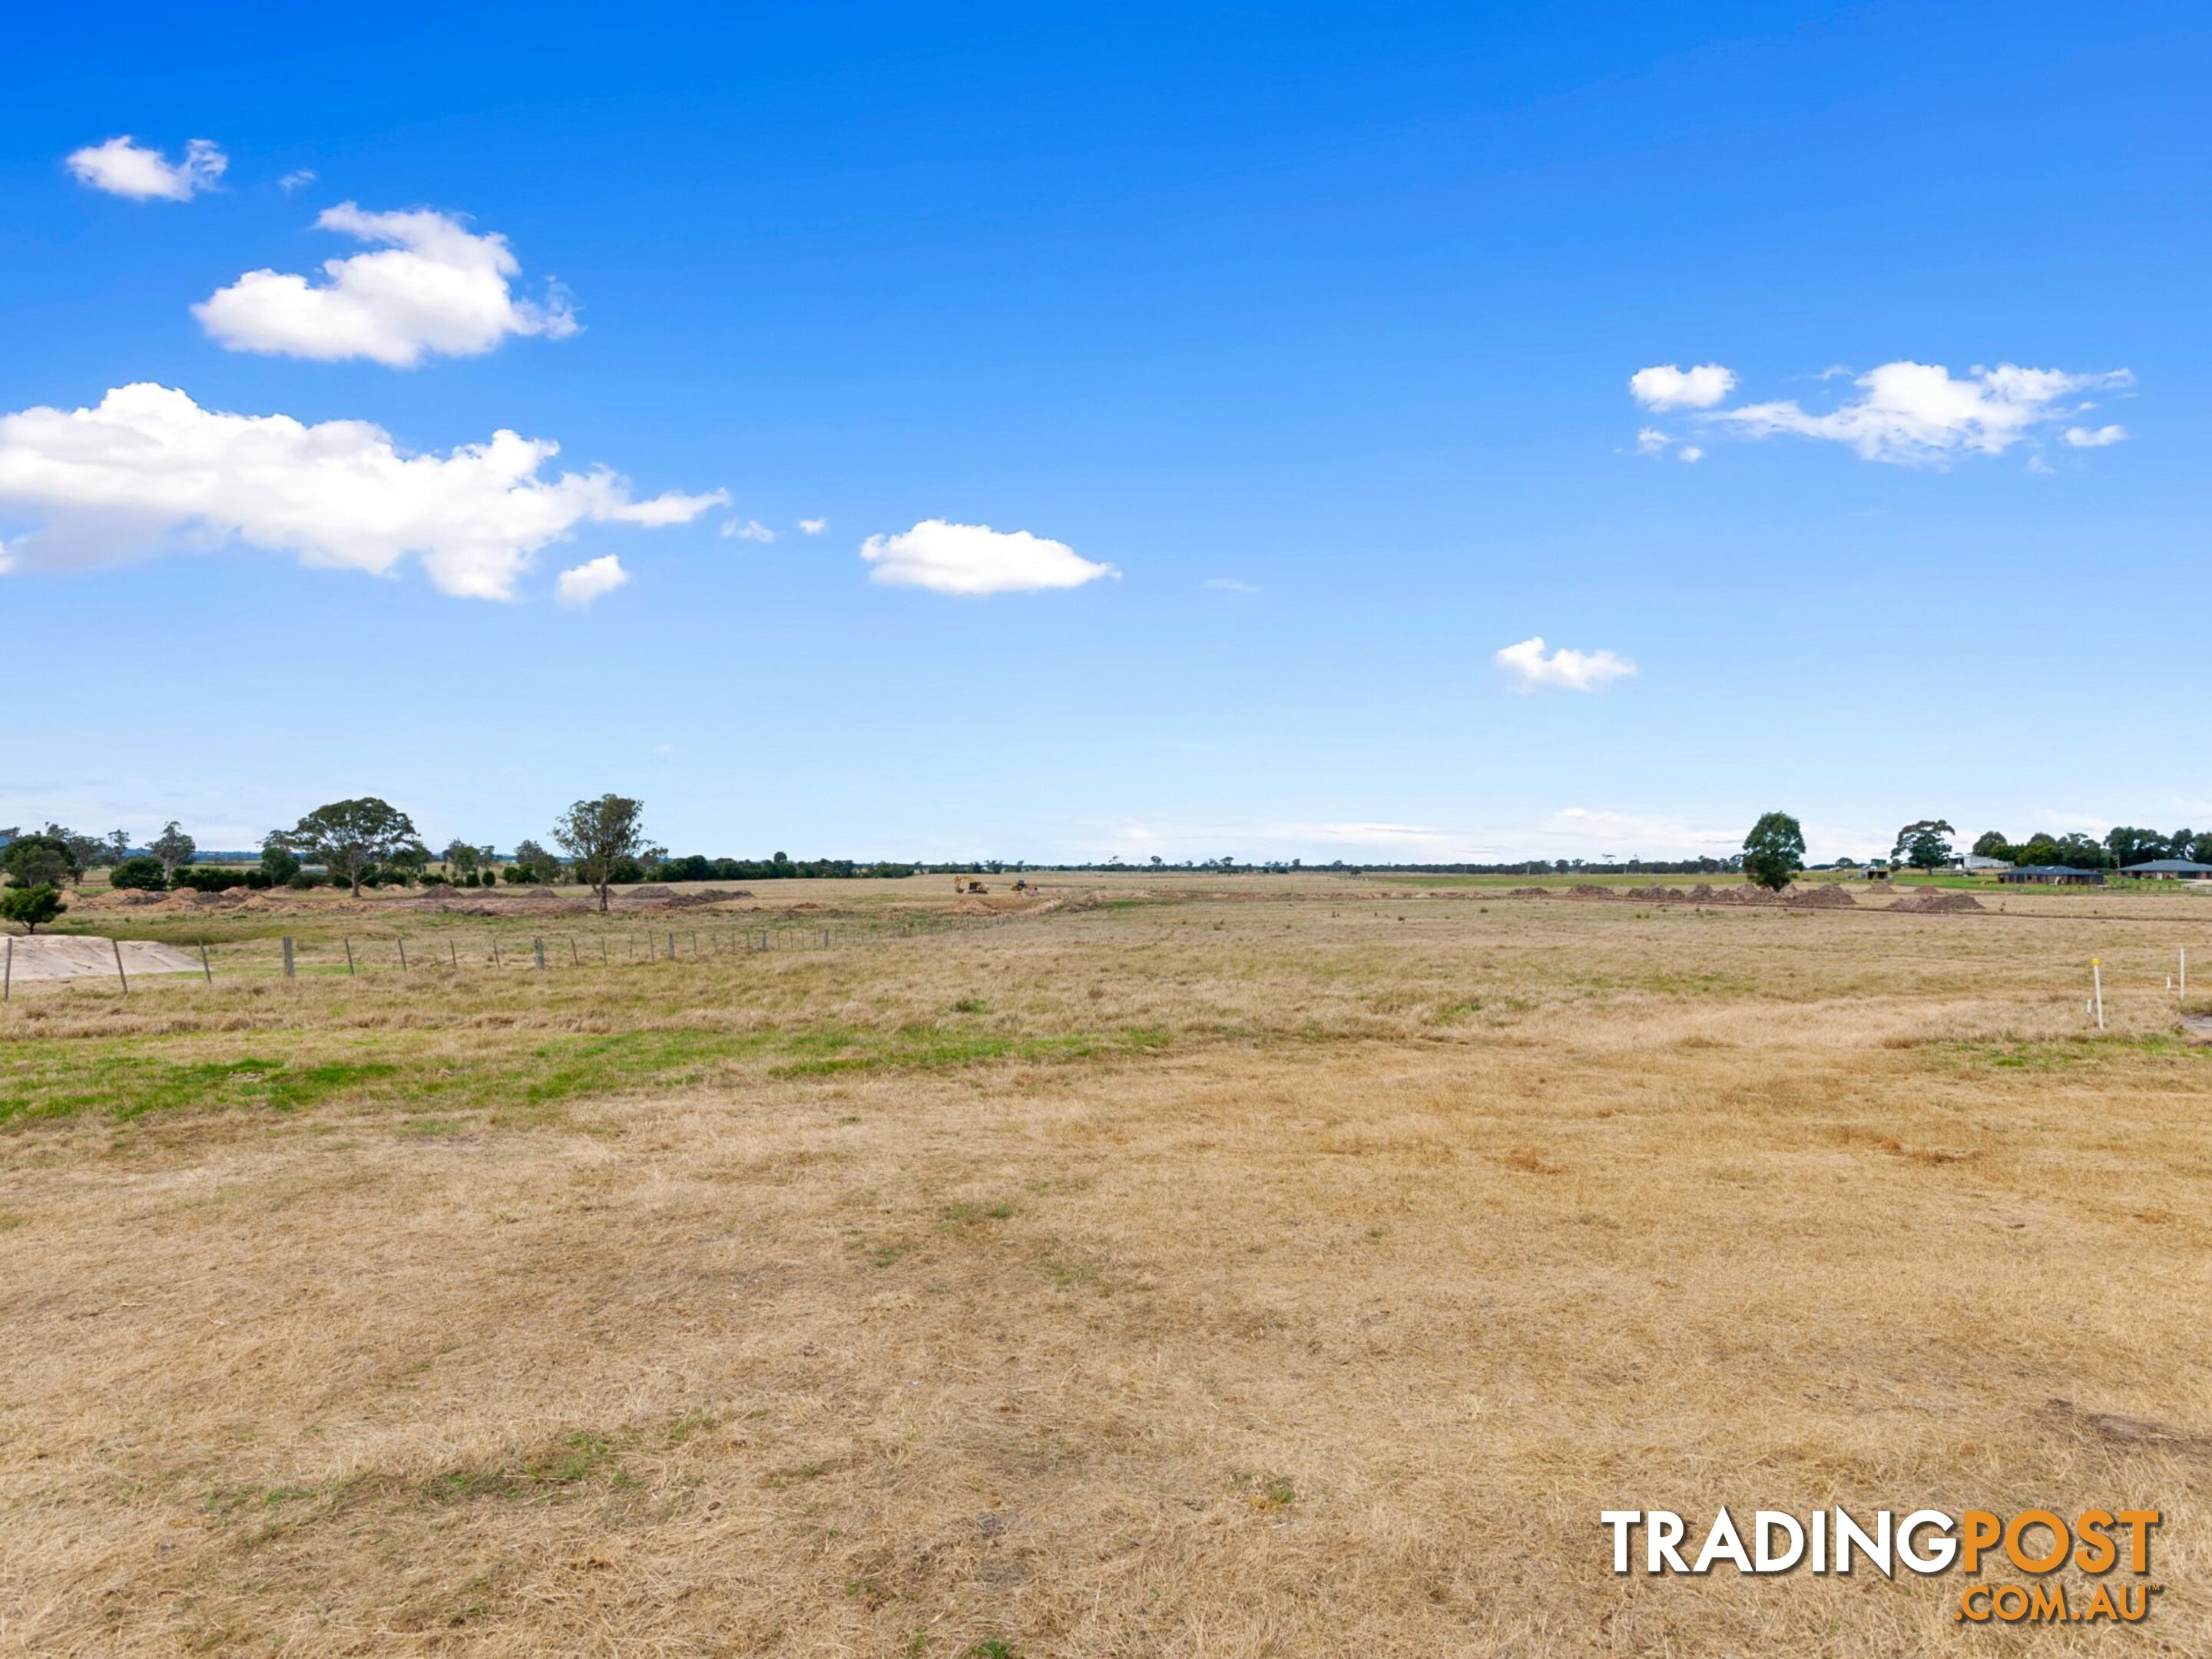 Lot 19/44 Varney Drive LINDENOW SOUTH VIC 3875